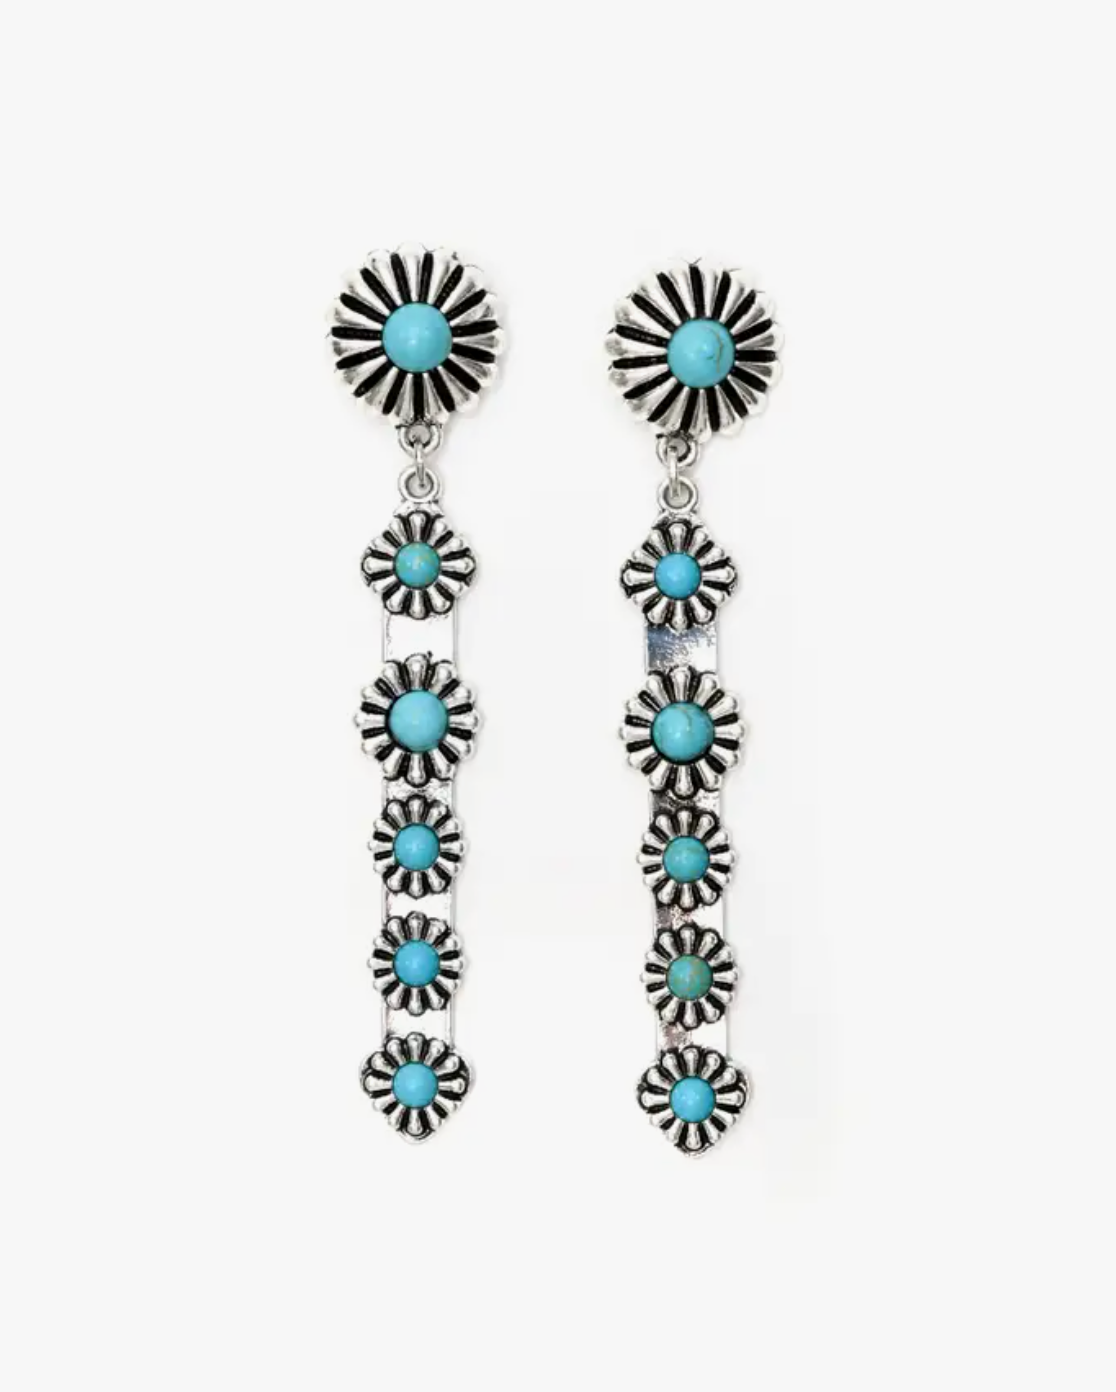 Silver Elongated Dangle Post Earrings With Turquoise Accents